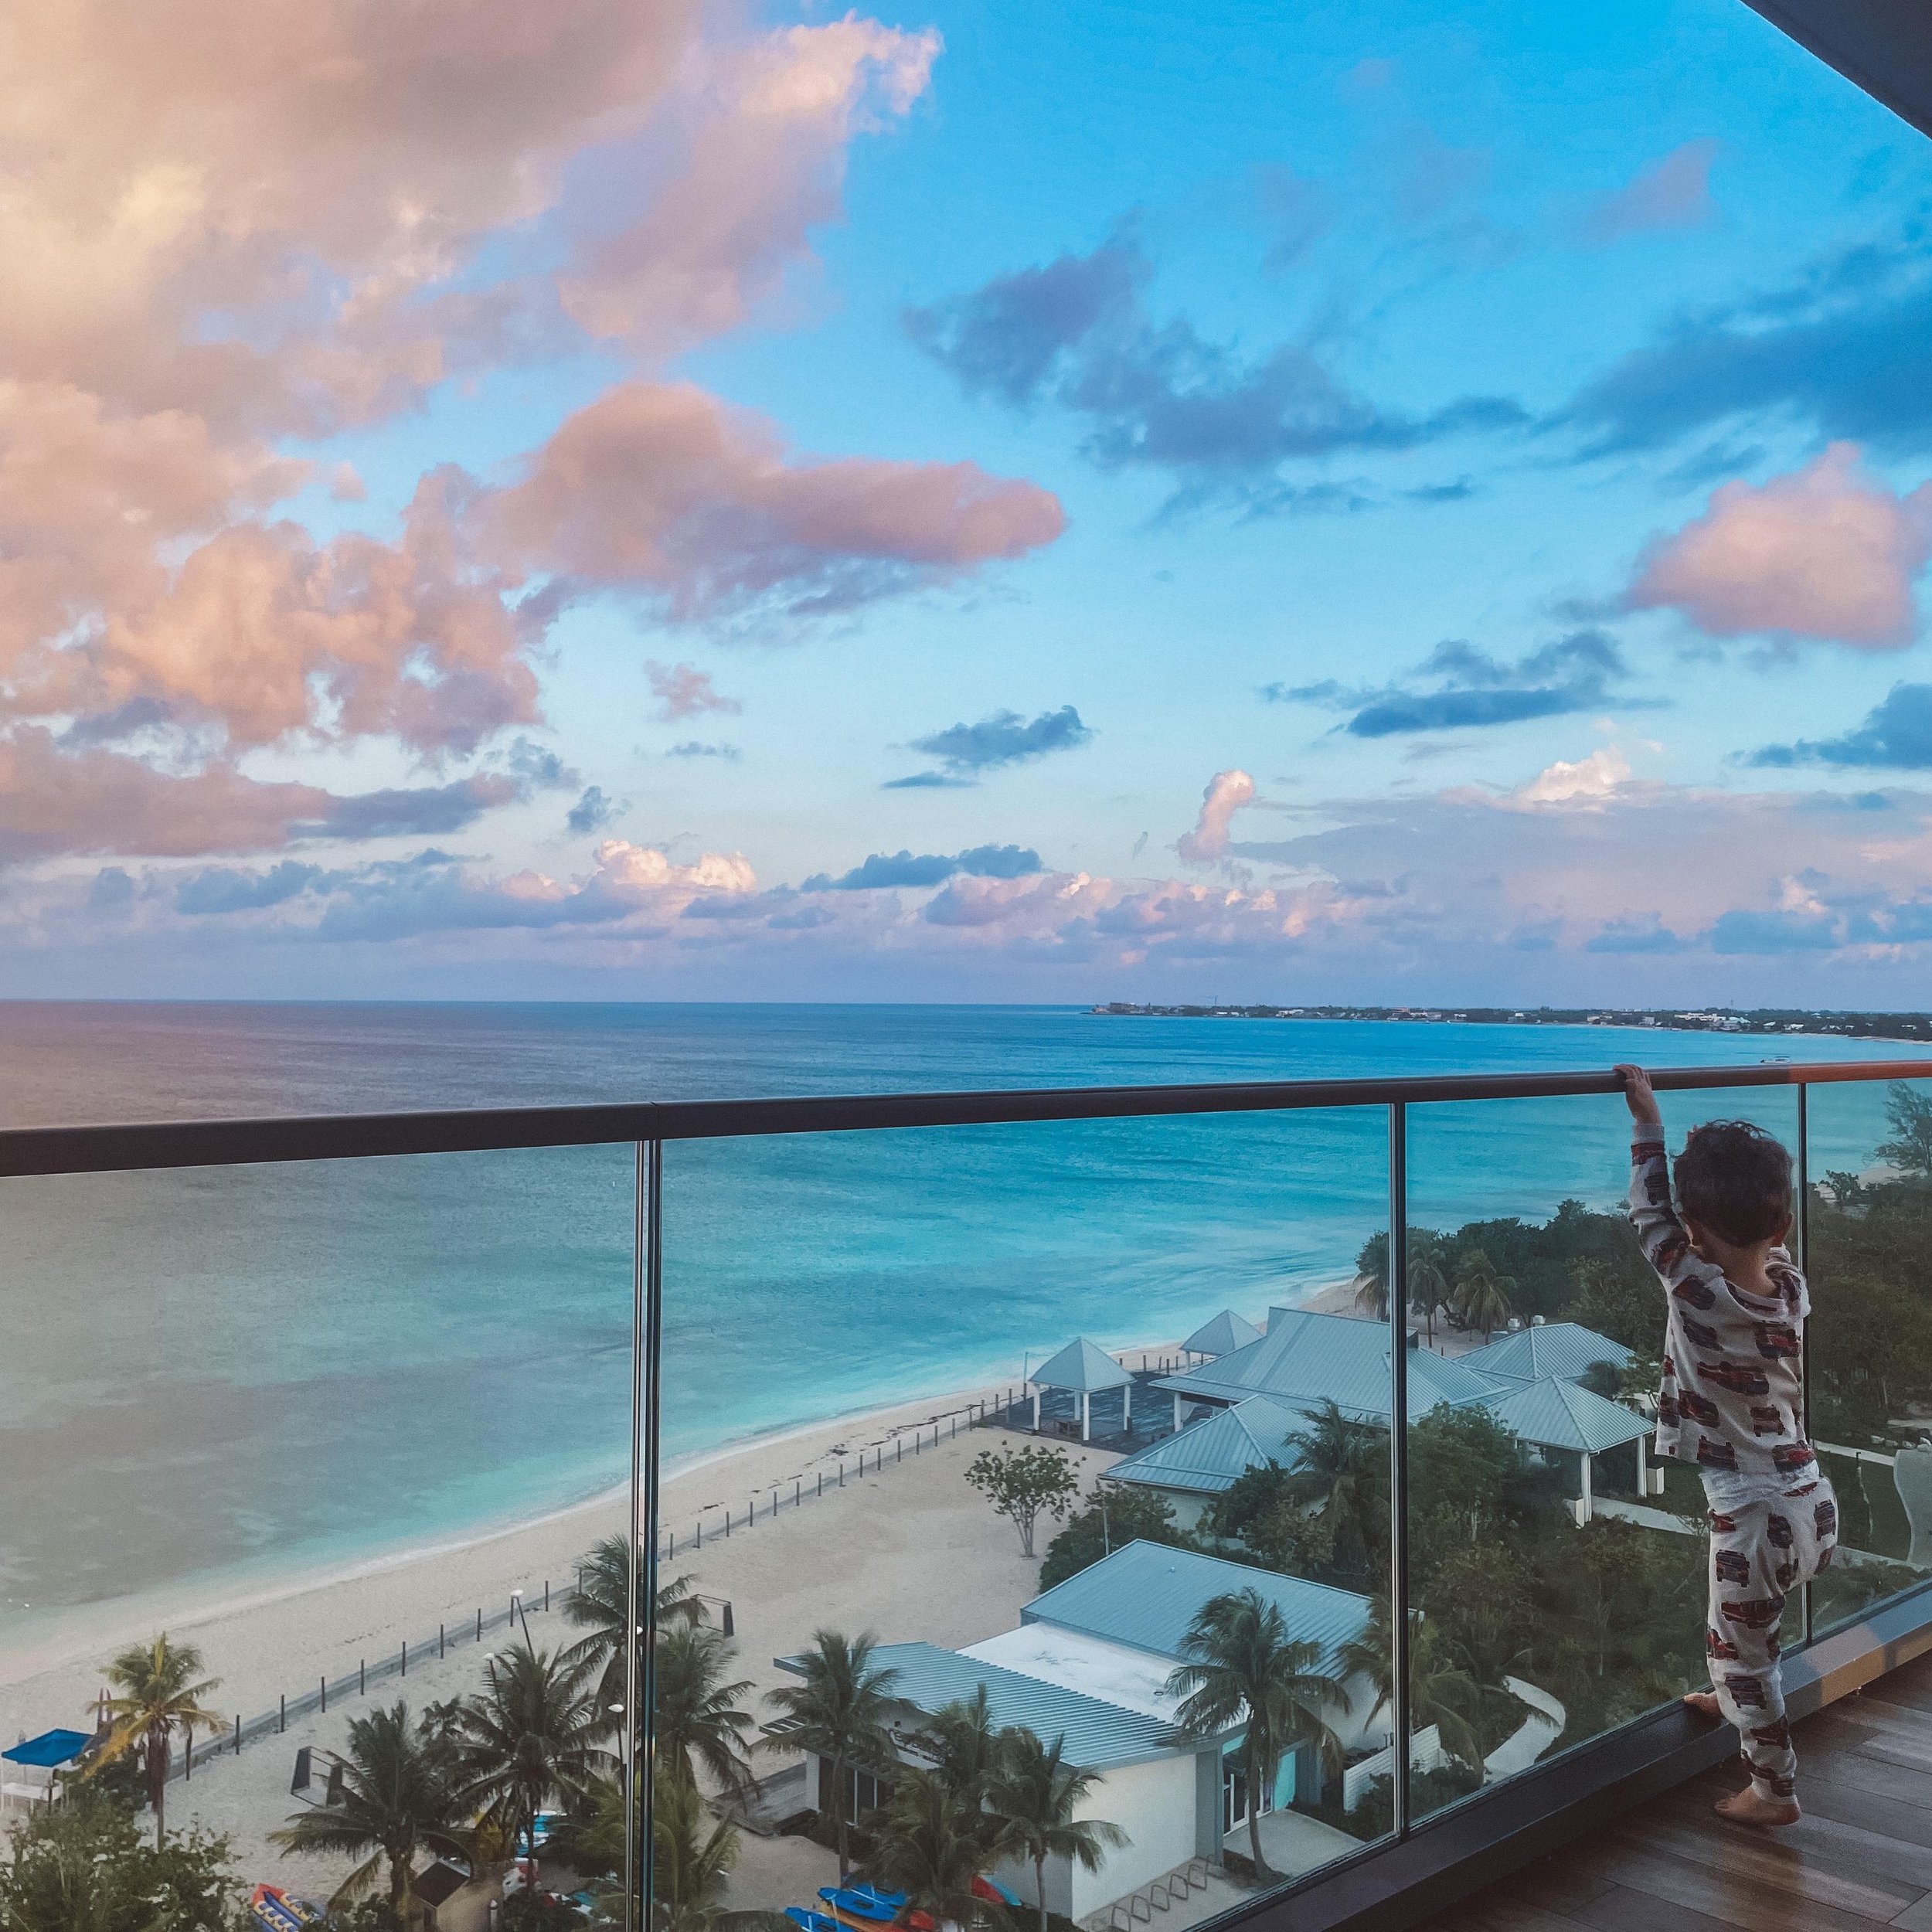 My thoughts on Grand Cayman. Absolutely loved this destination. Not only is it such an easy destination to get too.. the beaches, food, and the services was 10/10. There are three properties that I&rsquo;d recommend here @seafireresort, @ritzcarltong